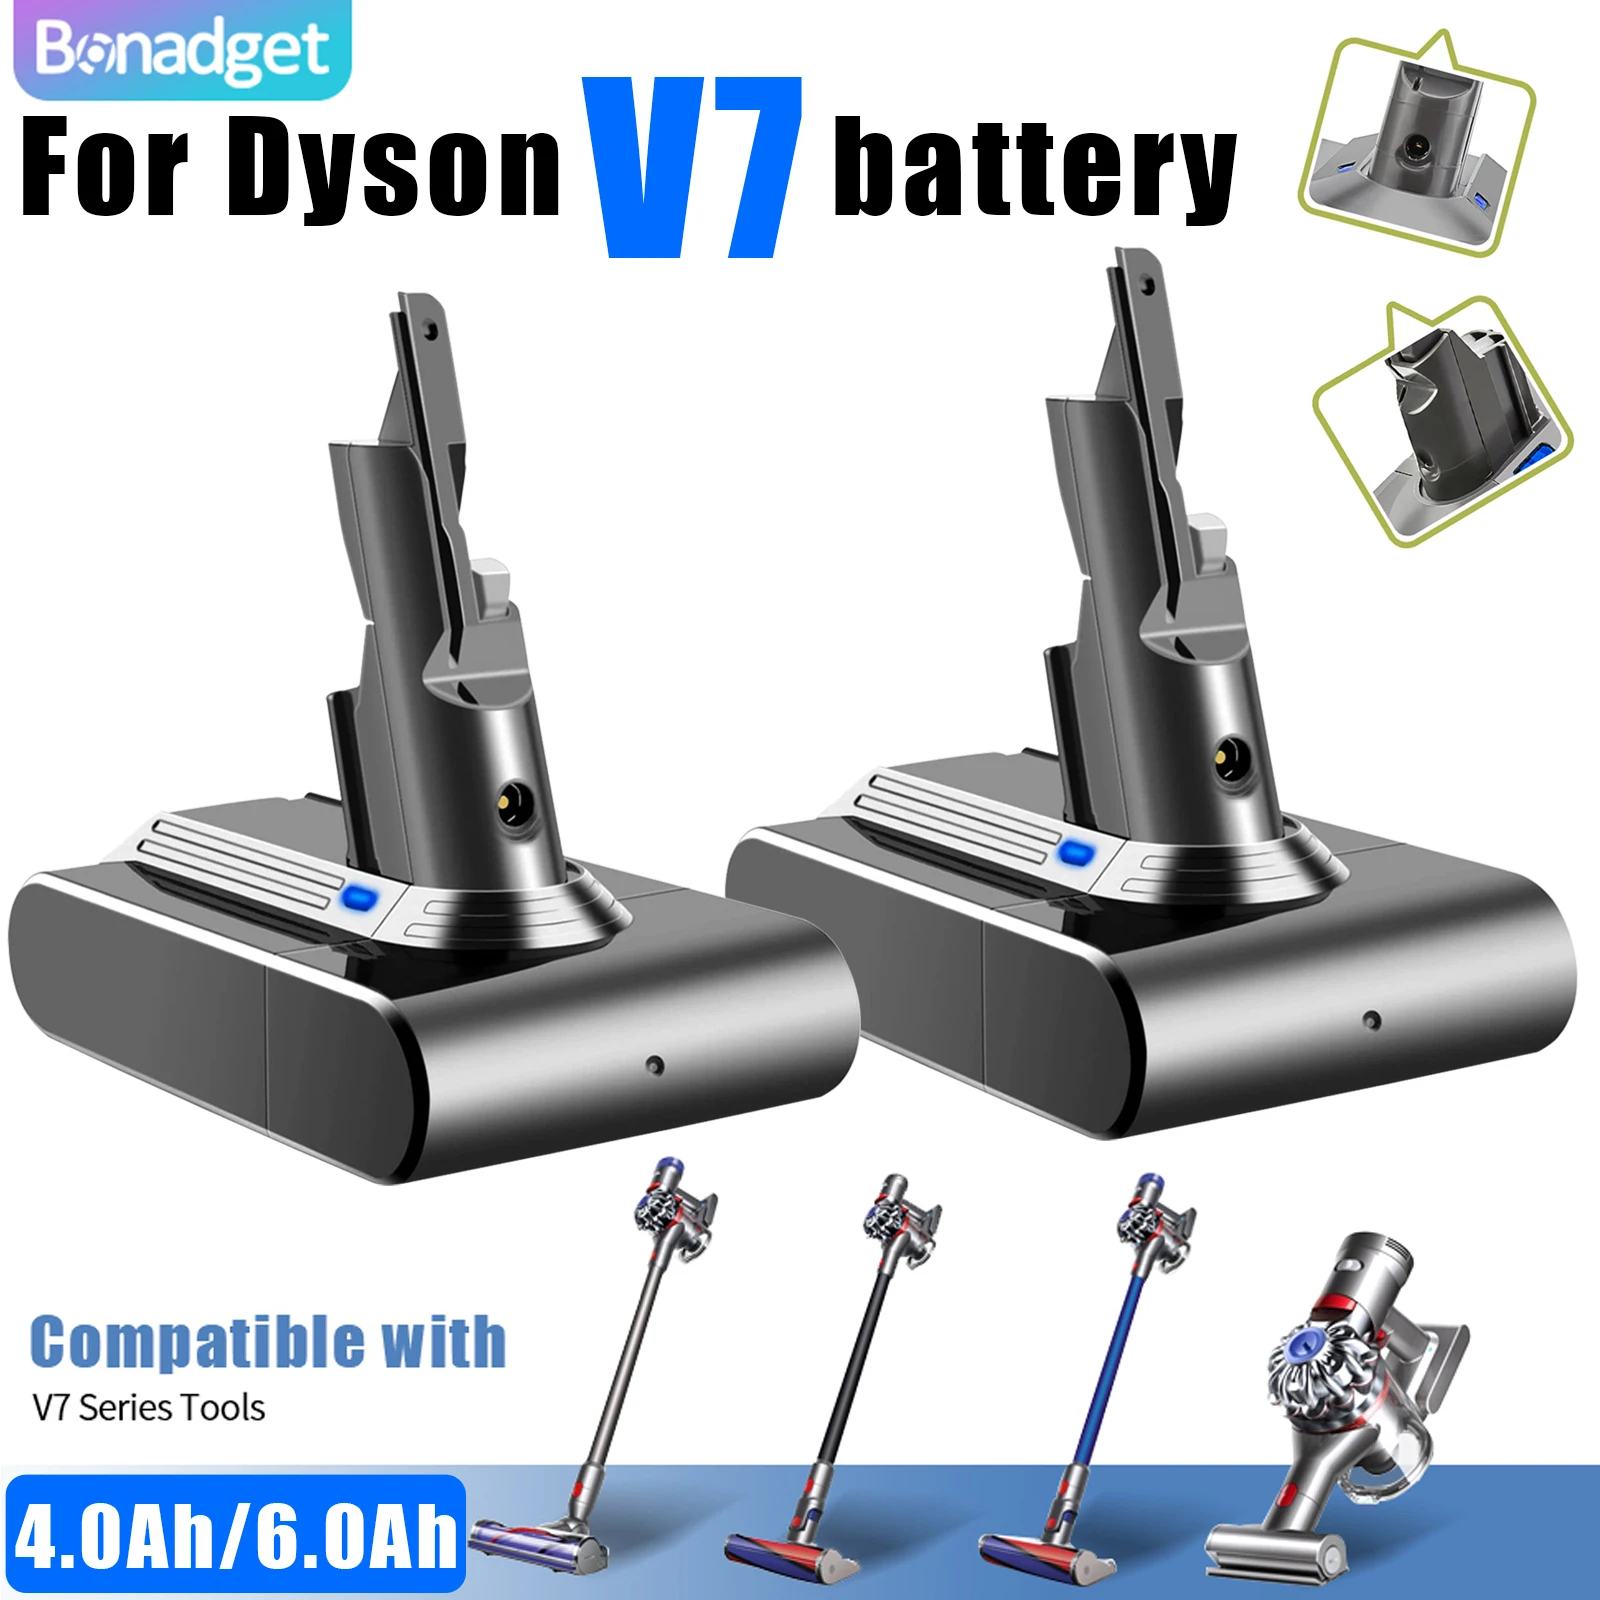 

Bonadget 4.0Ah/6.0Ah 21.6V Li-ion Replacement V7 Batteries for Dyson V7 225403 Vacuum Cleaner Chargeable Power Tools Battery